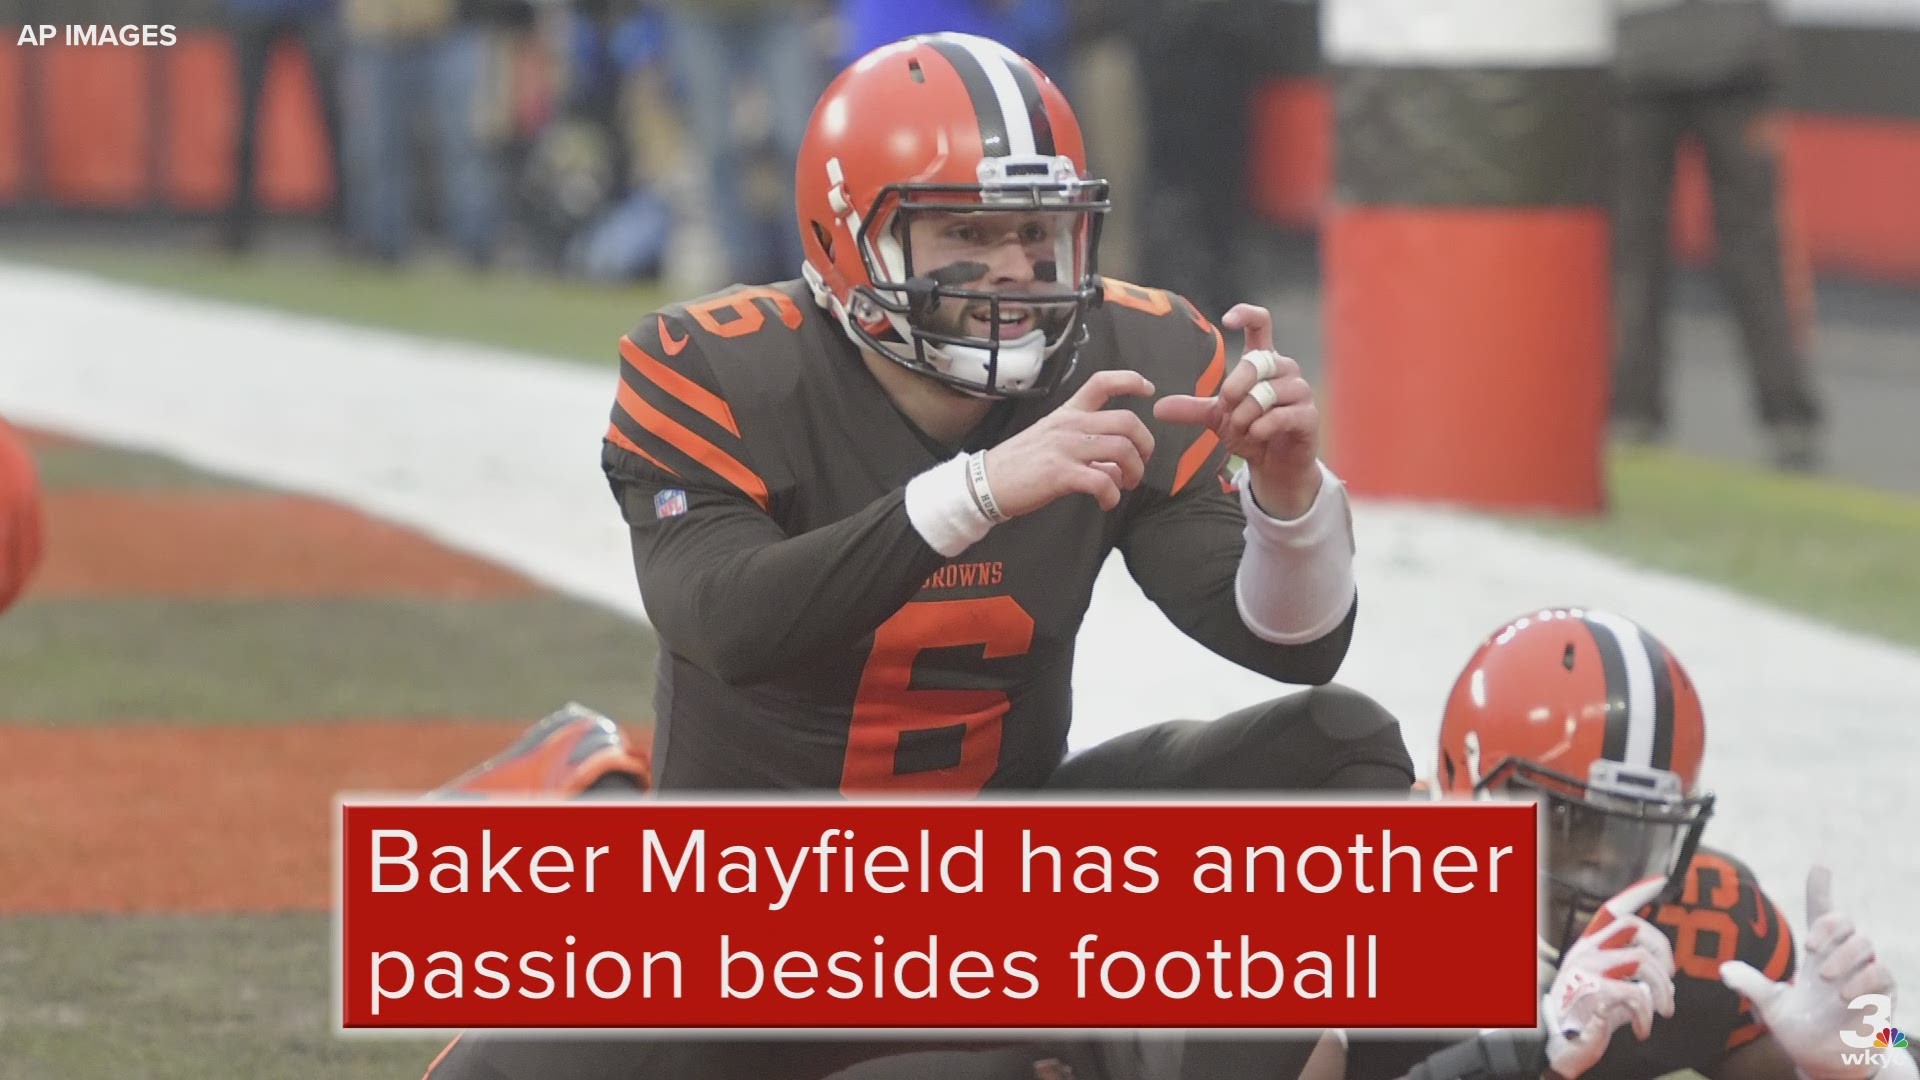 Speaking to Allied Esports, Cleveland Browns quarterback Baker Mayfield discussed one of his more unique passions: gaming.